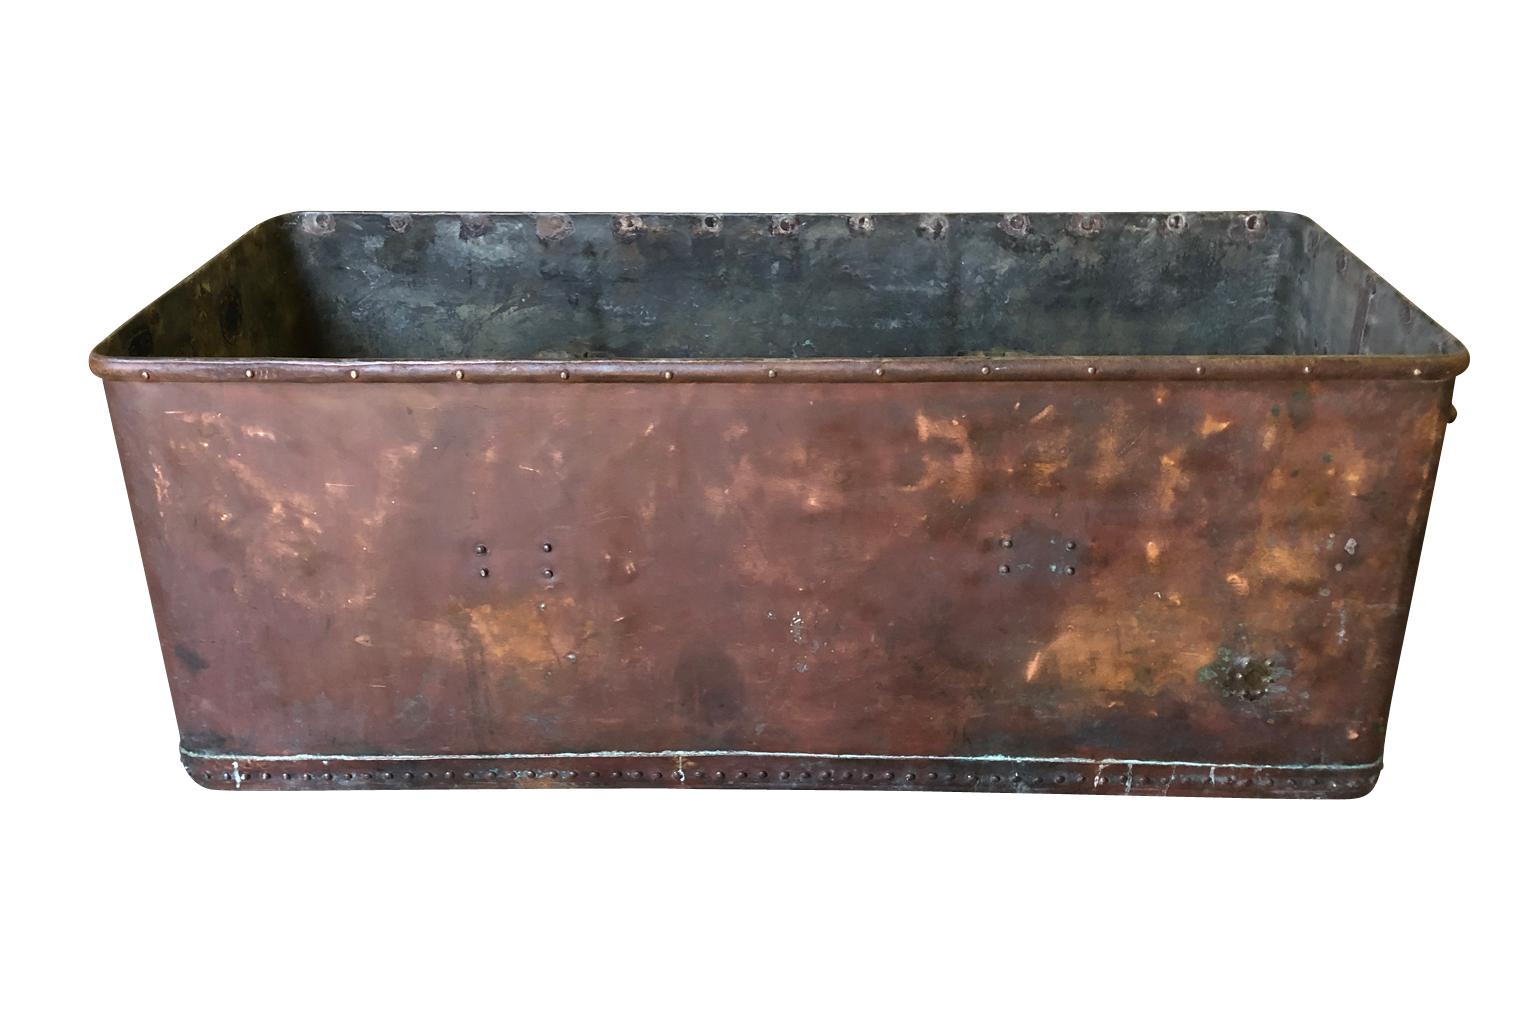 A terrific French later 19th century industrial tub or trough wonderfully constructed from heavy gauge copper.  Wonderful as a large planter or as a tub to ice down beverages for a party.  